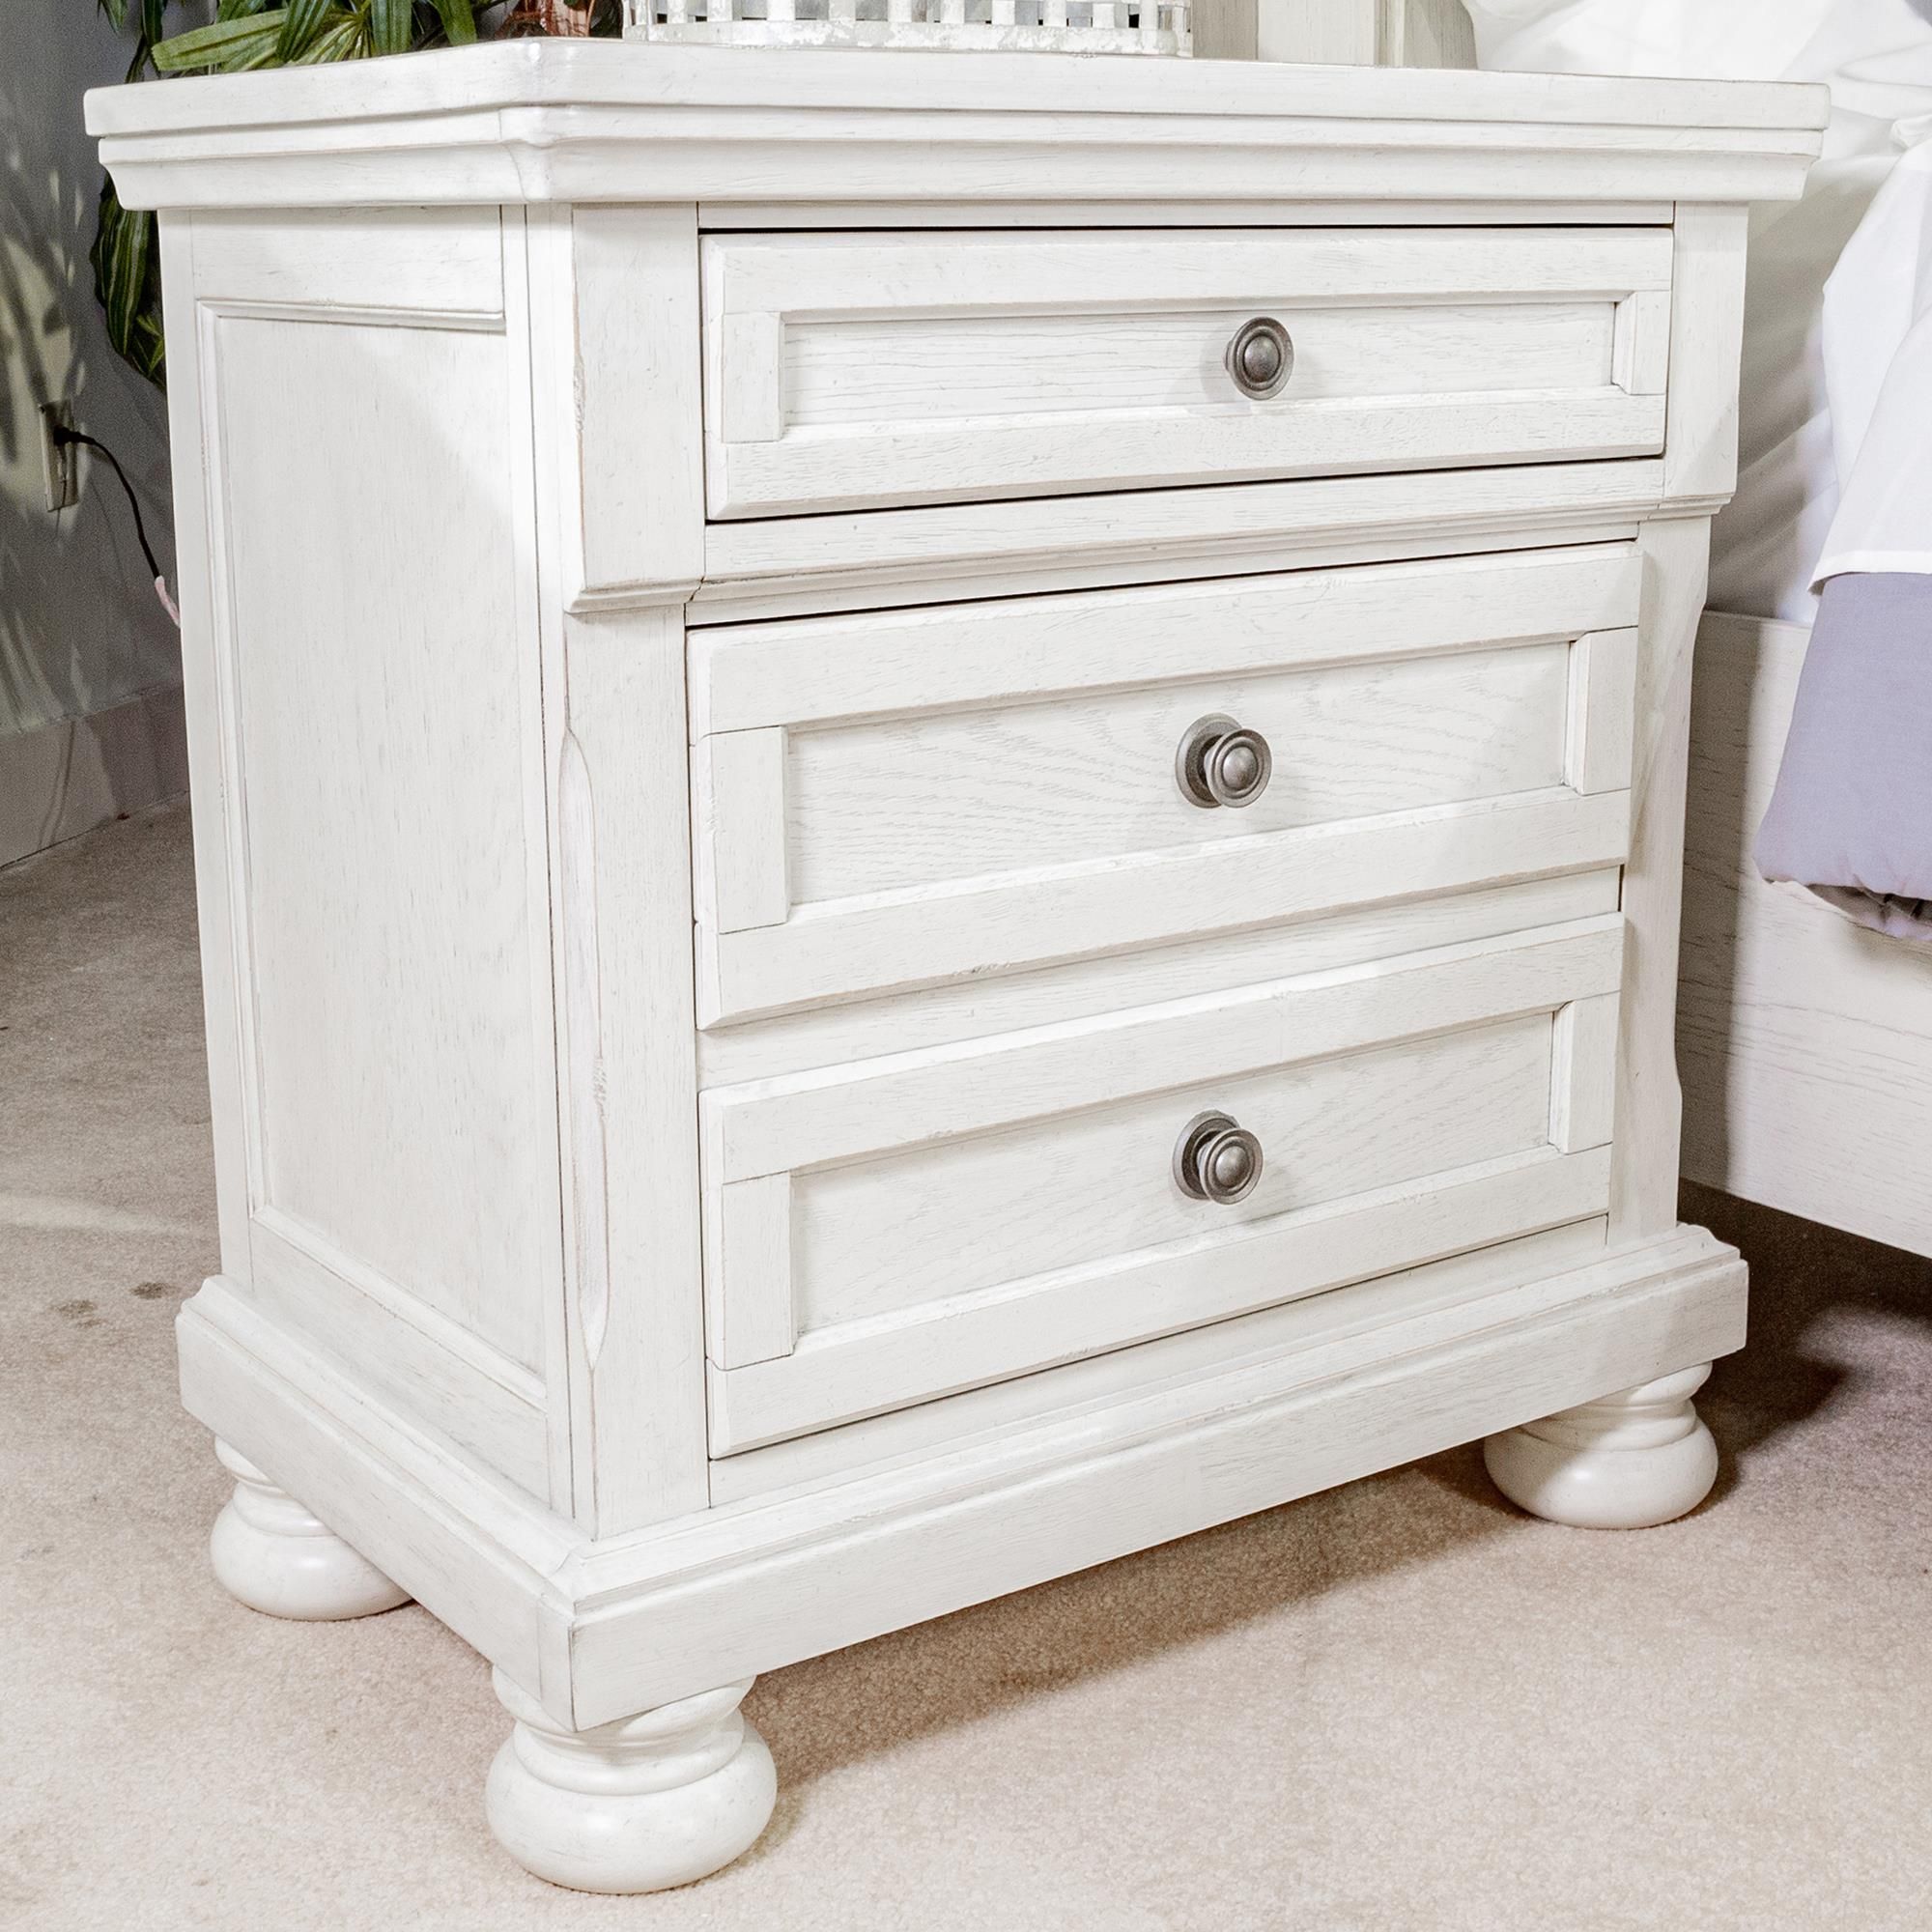 Timeless Elegance: The Beauty of Antique White Bedroom Furniture